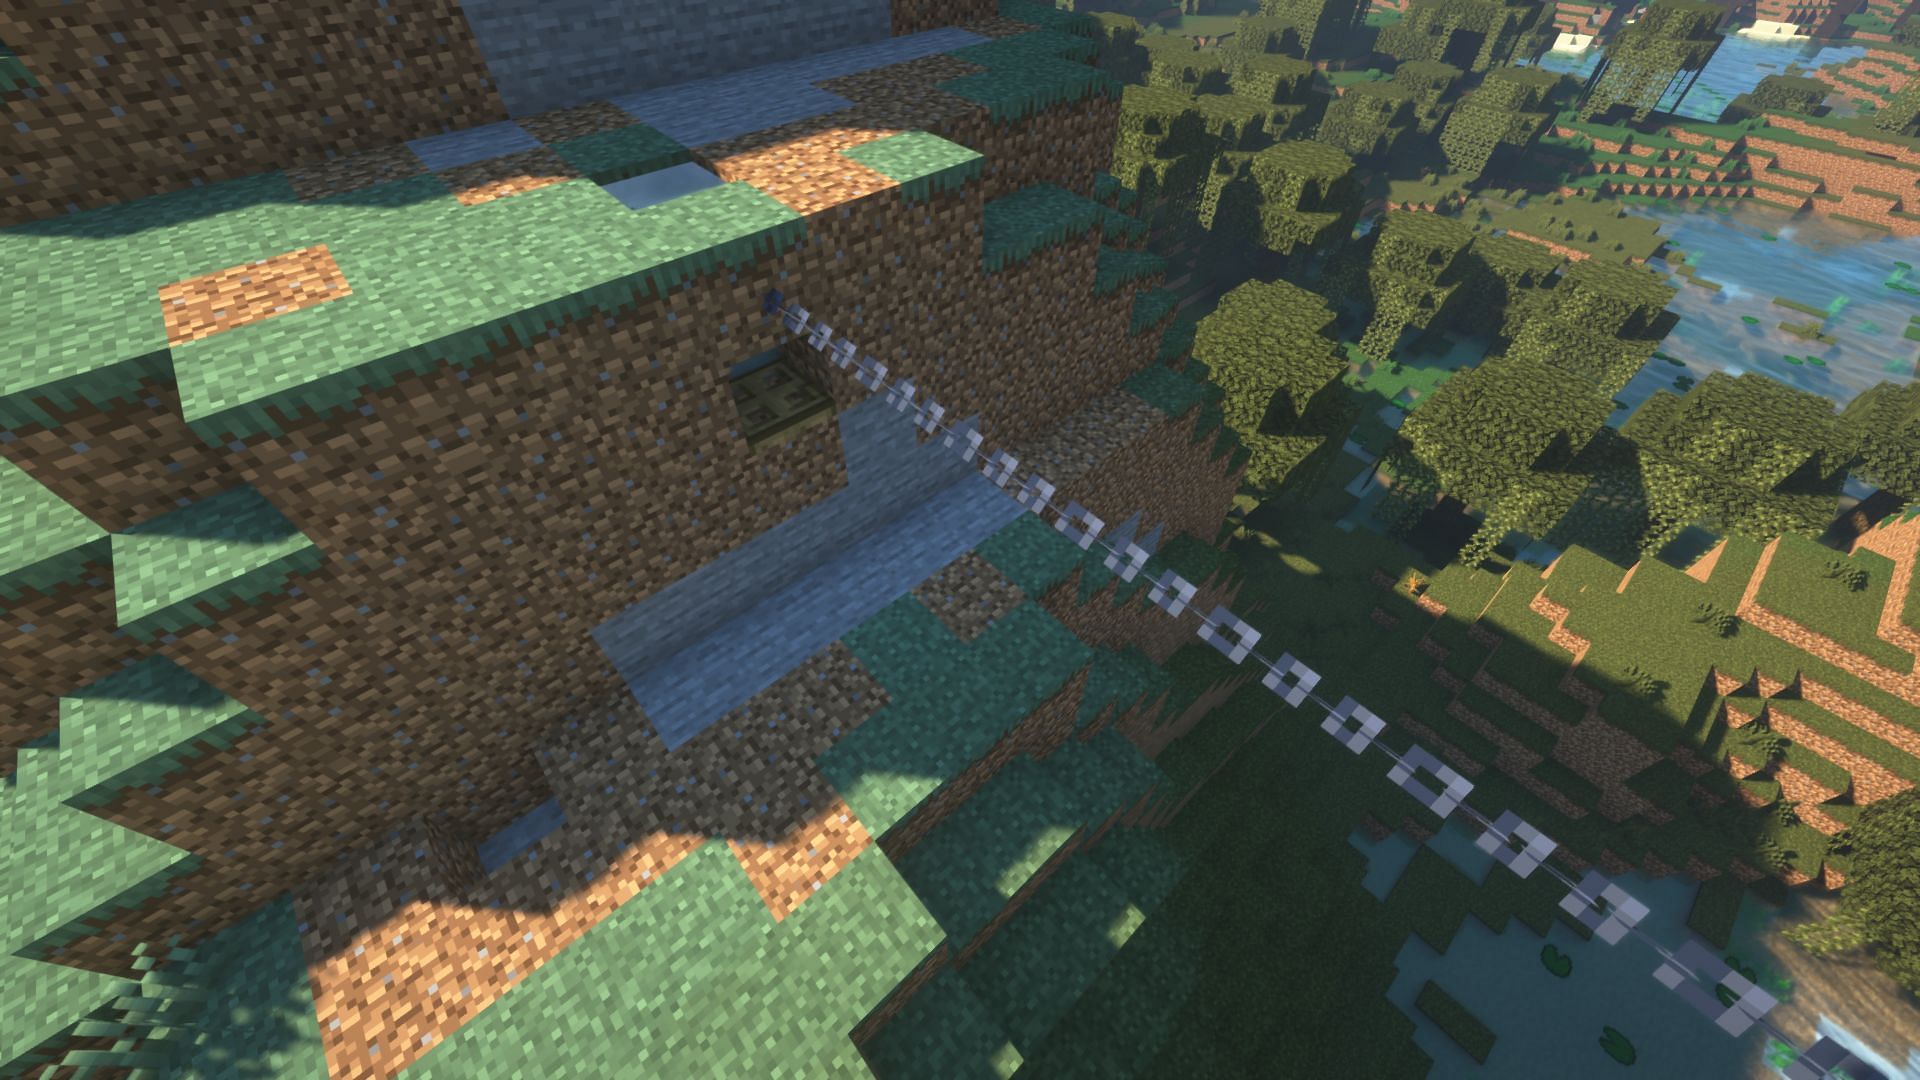 A very basic zipline design carved into the side of a large hill (Image via Mojang).